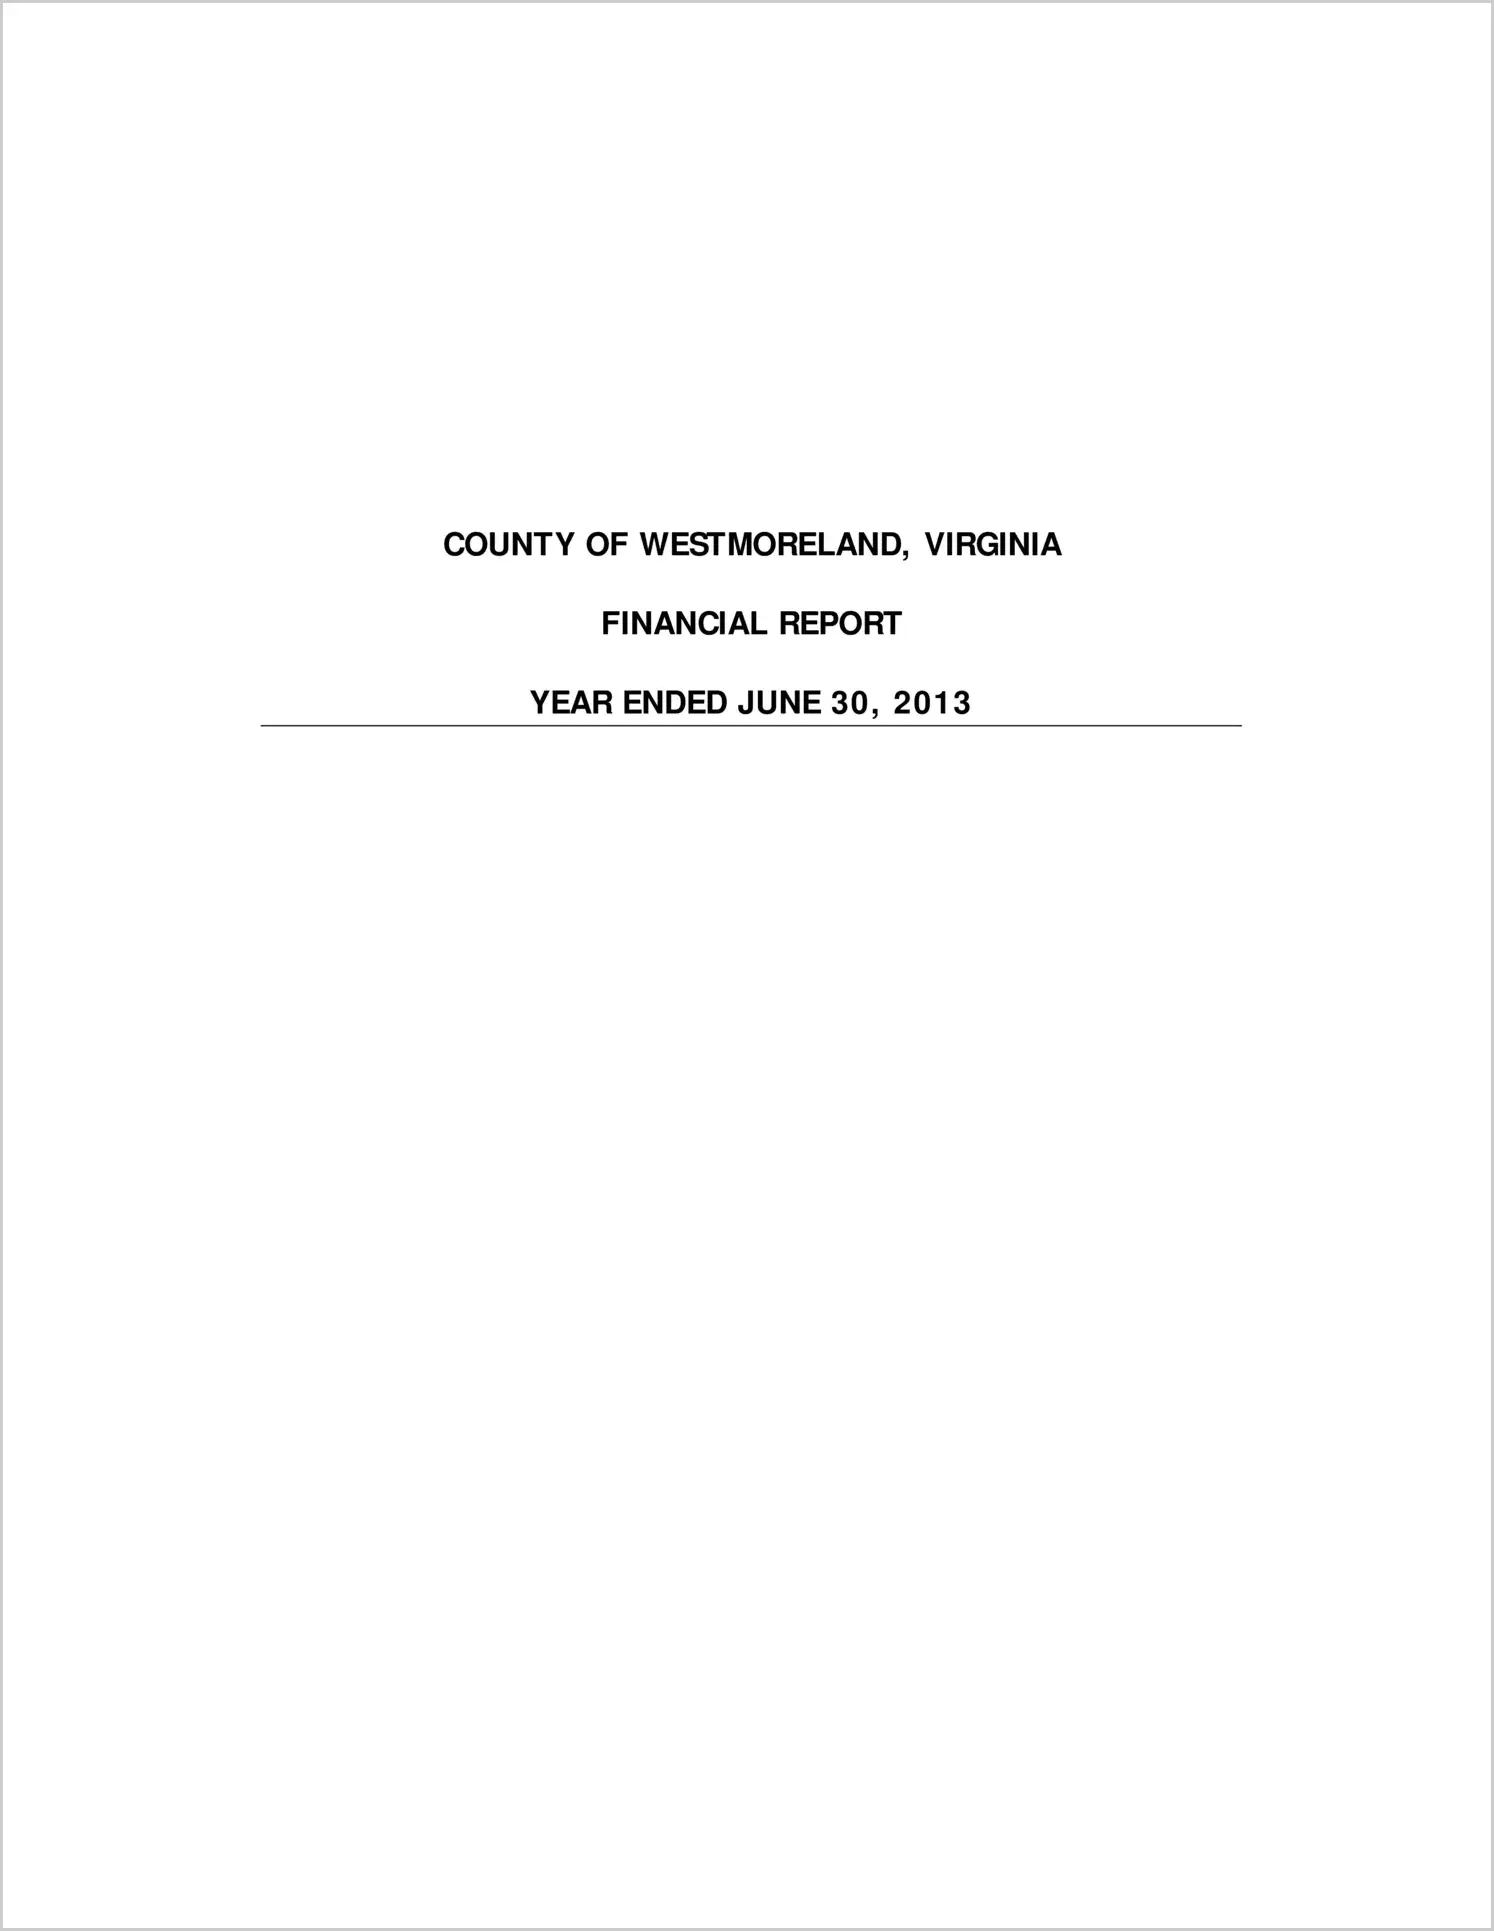 2013 Annual Financial Report for County of Westmoreland